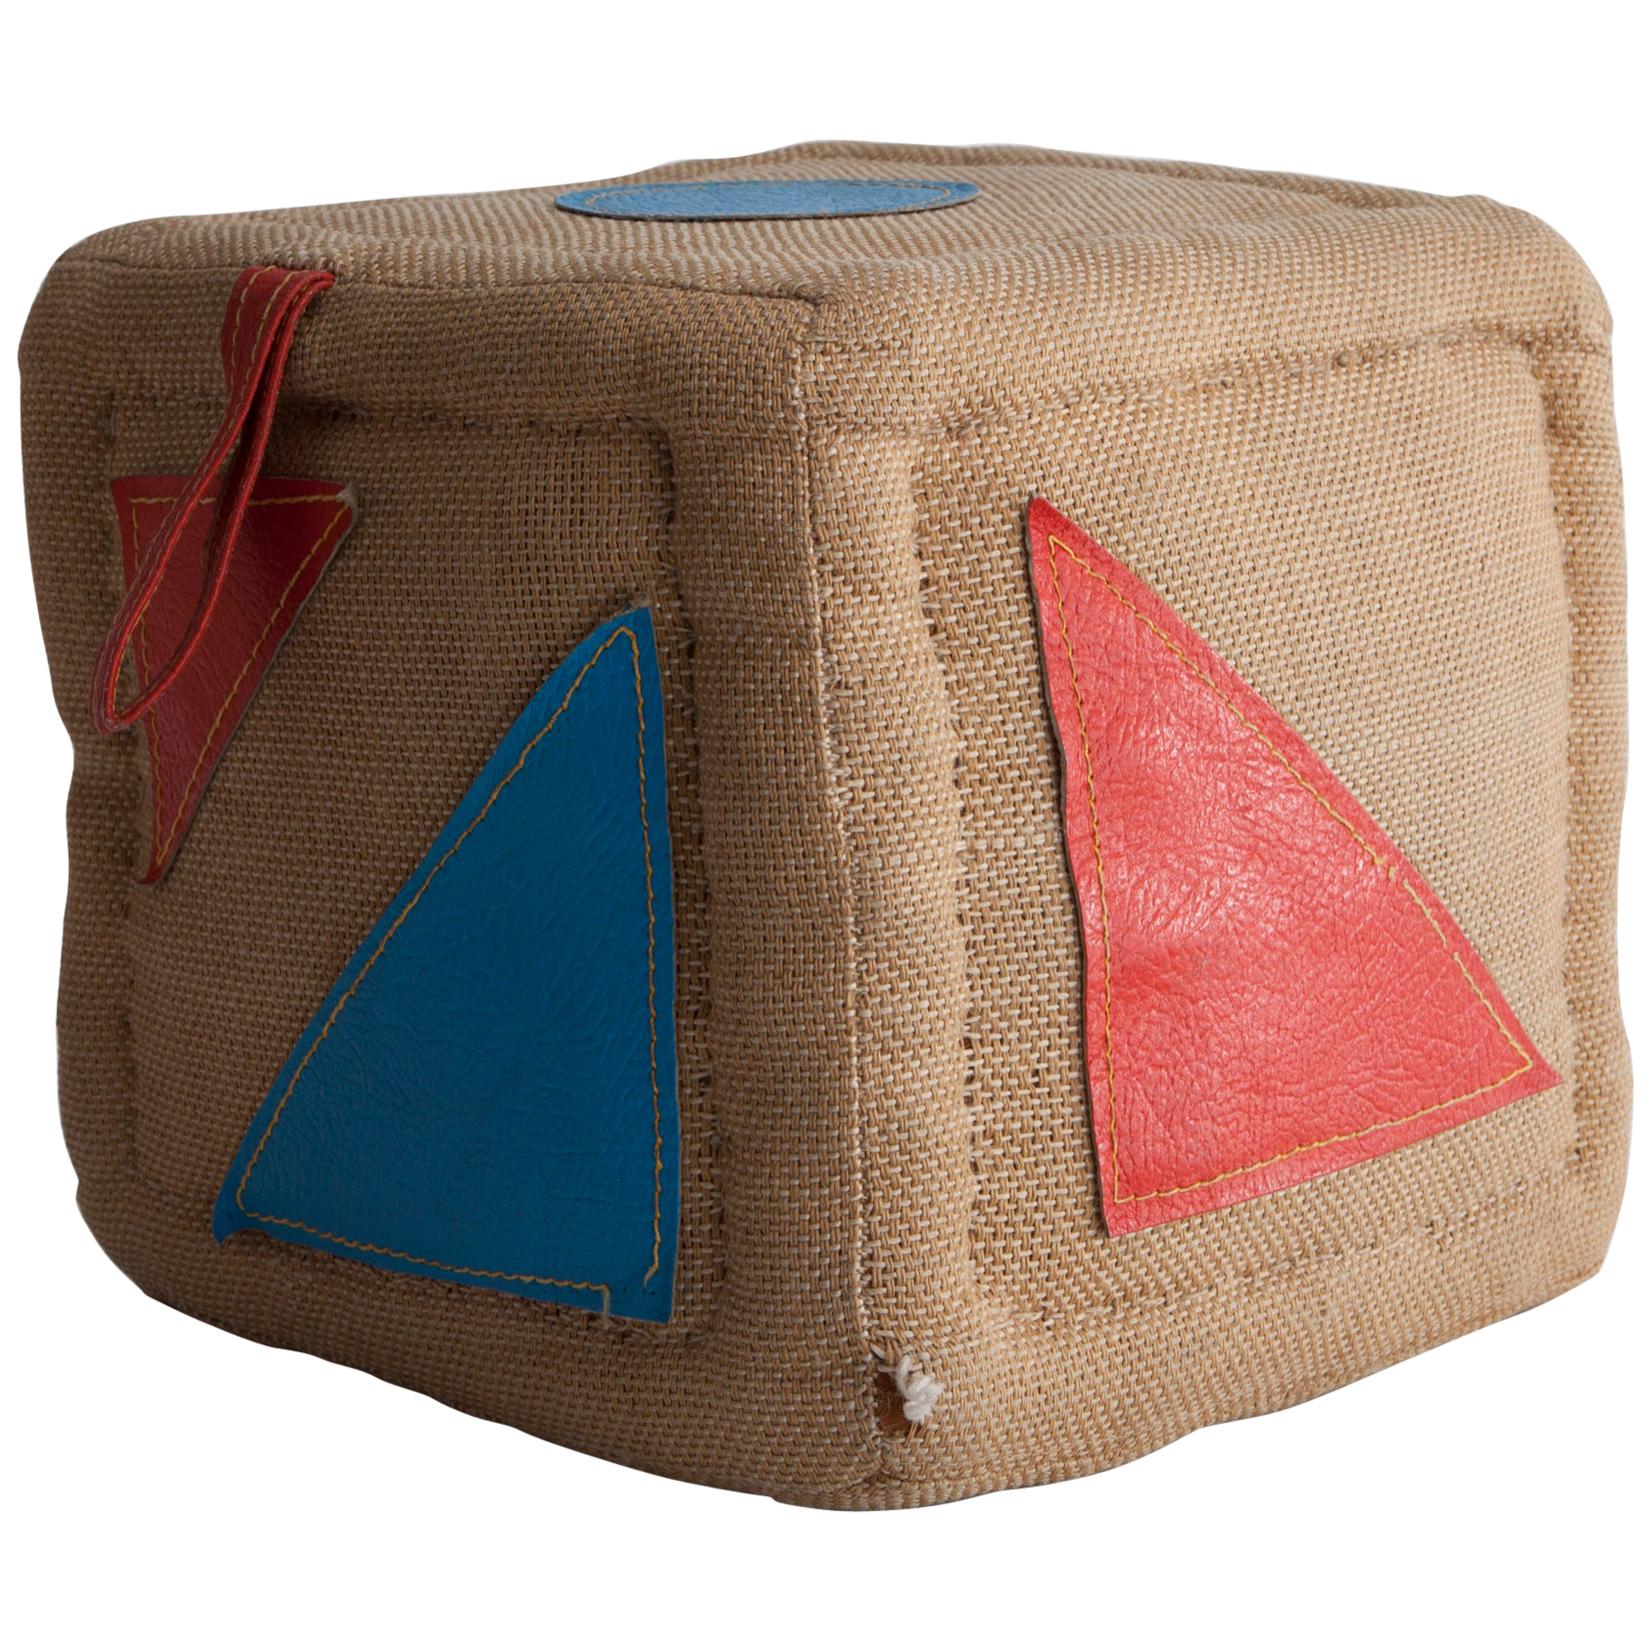 Therapeutic Toy Cube in Jute with Leather by Renate Müller, 1968-1974